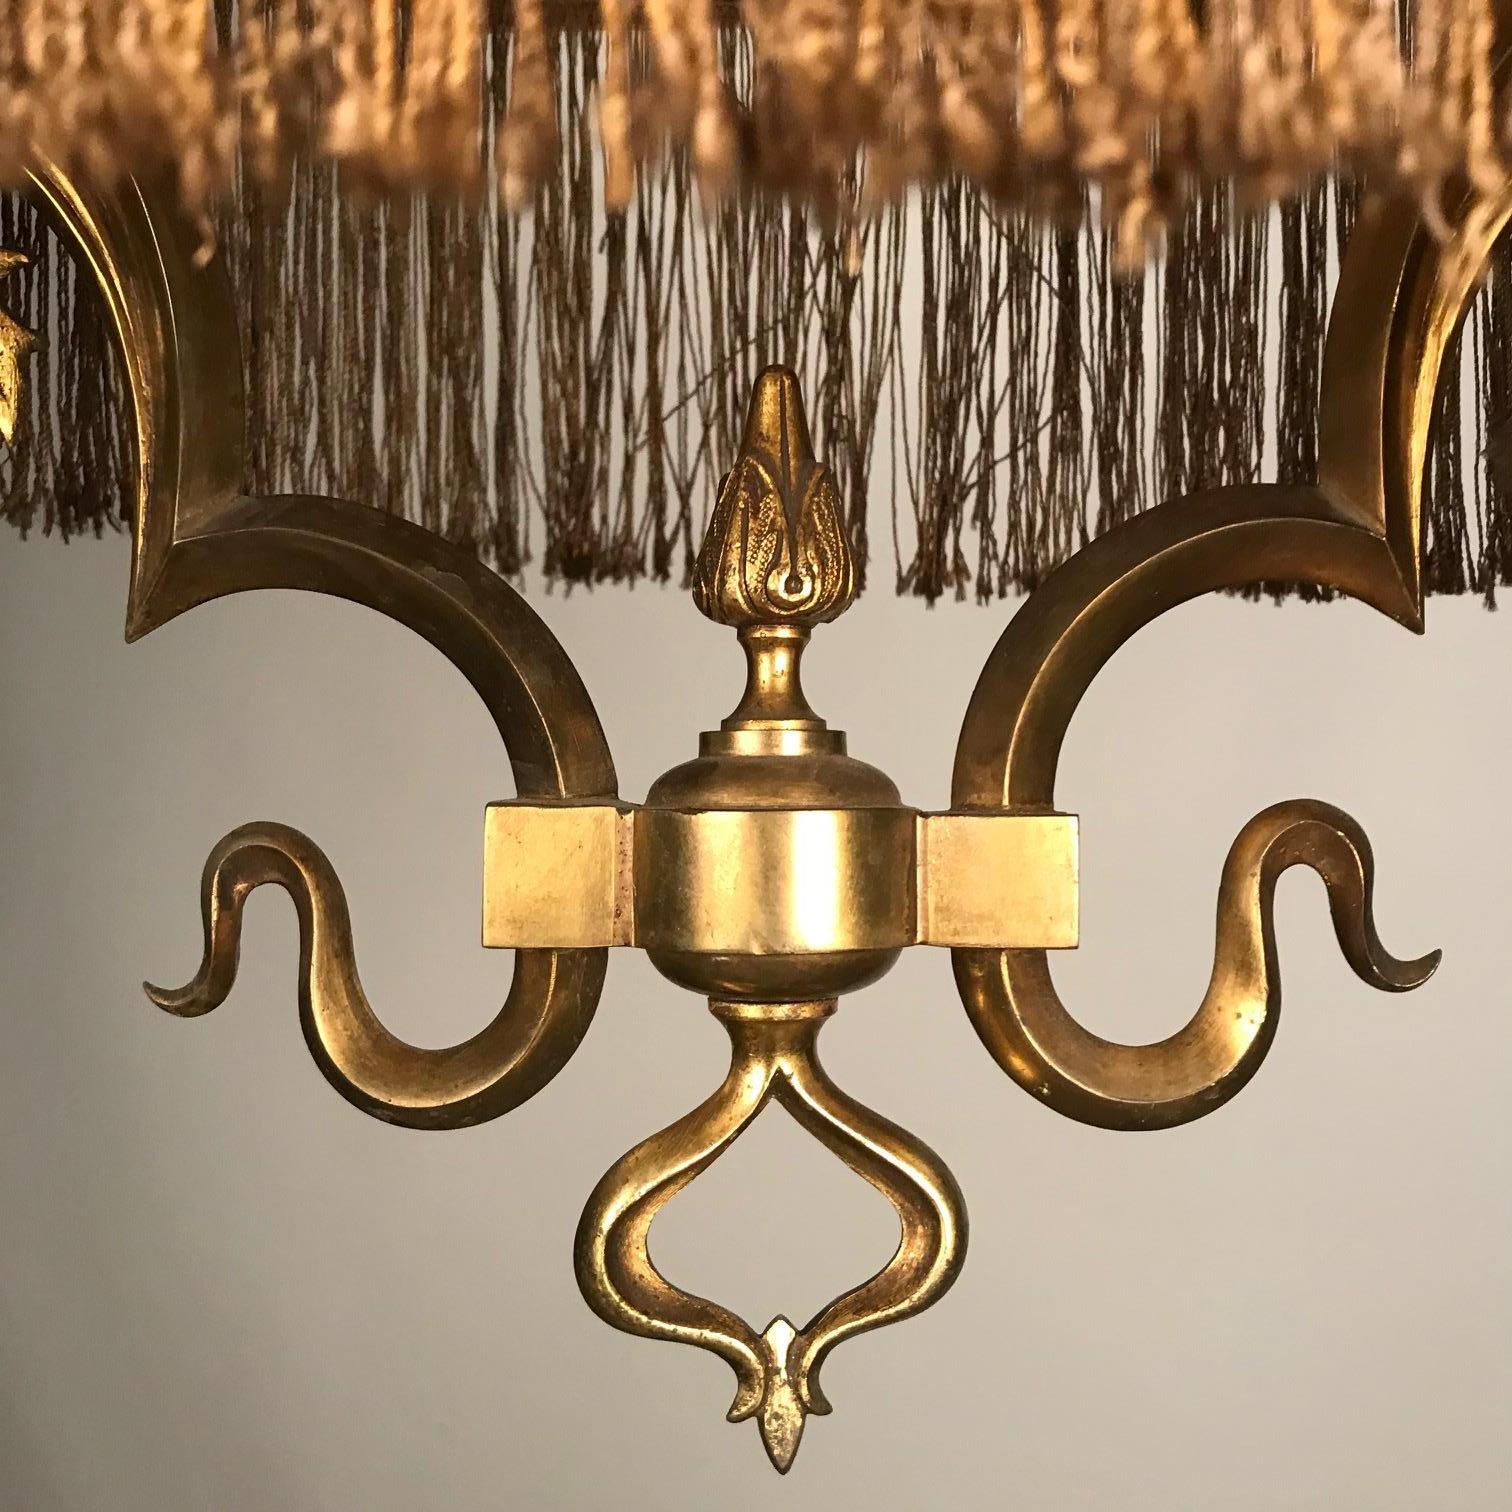 This unusual hanging fixture much evokes a fin de Siecle sensibility. The four scrolling arms with flower form frosted shades are on downswept gas tubes now altered for electricity. The central cluster is mounted with an hexagonal shade formed with